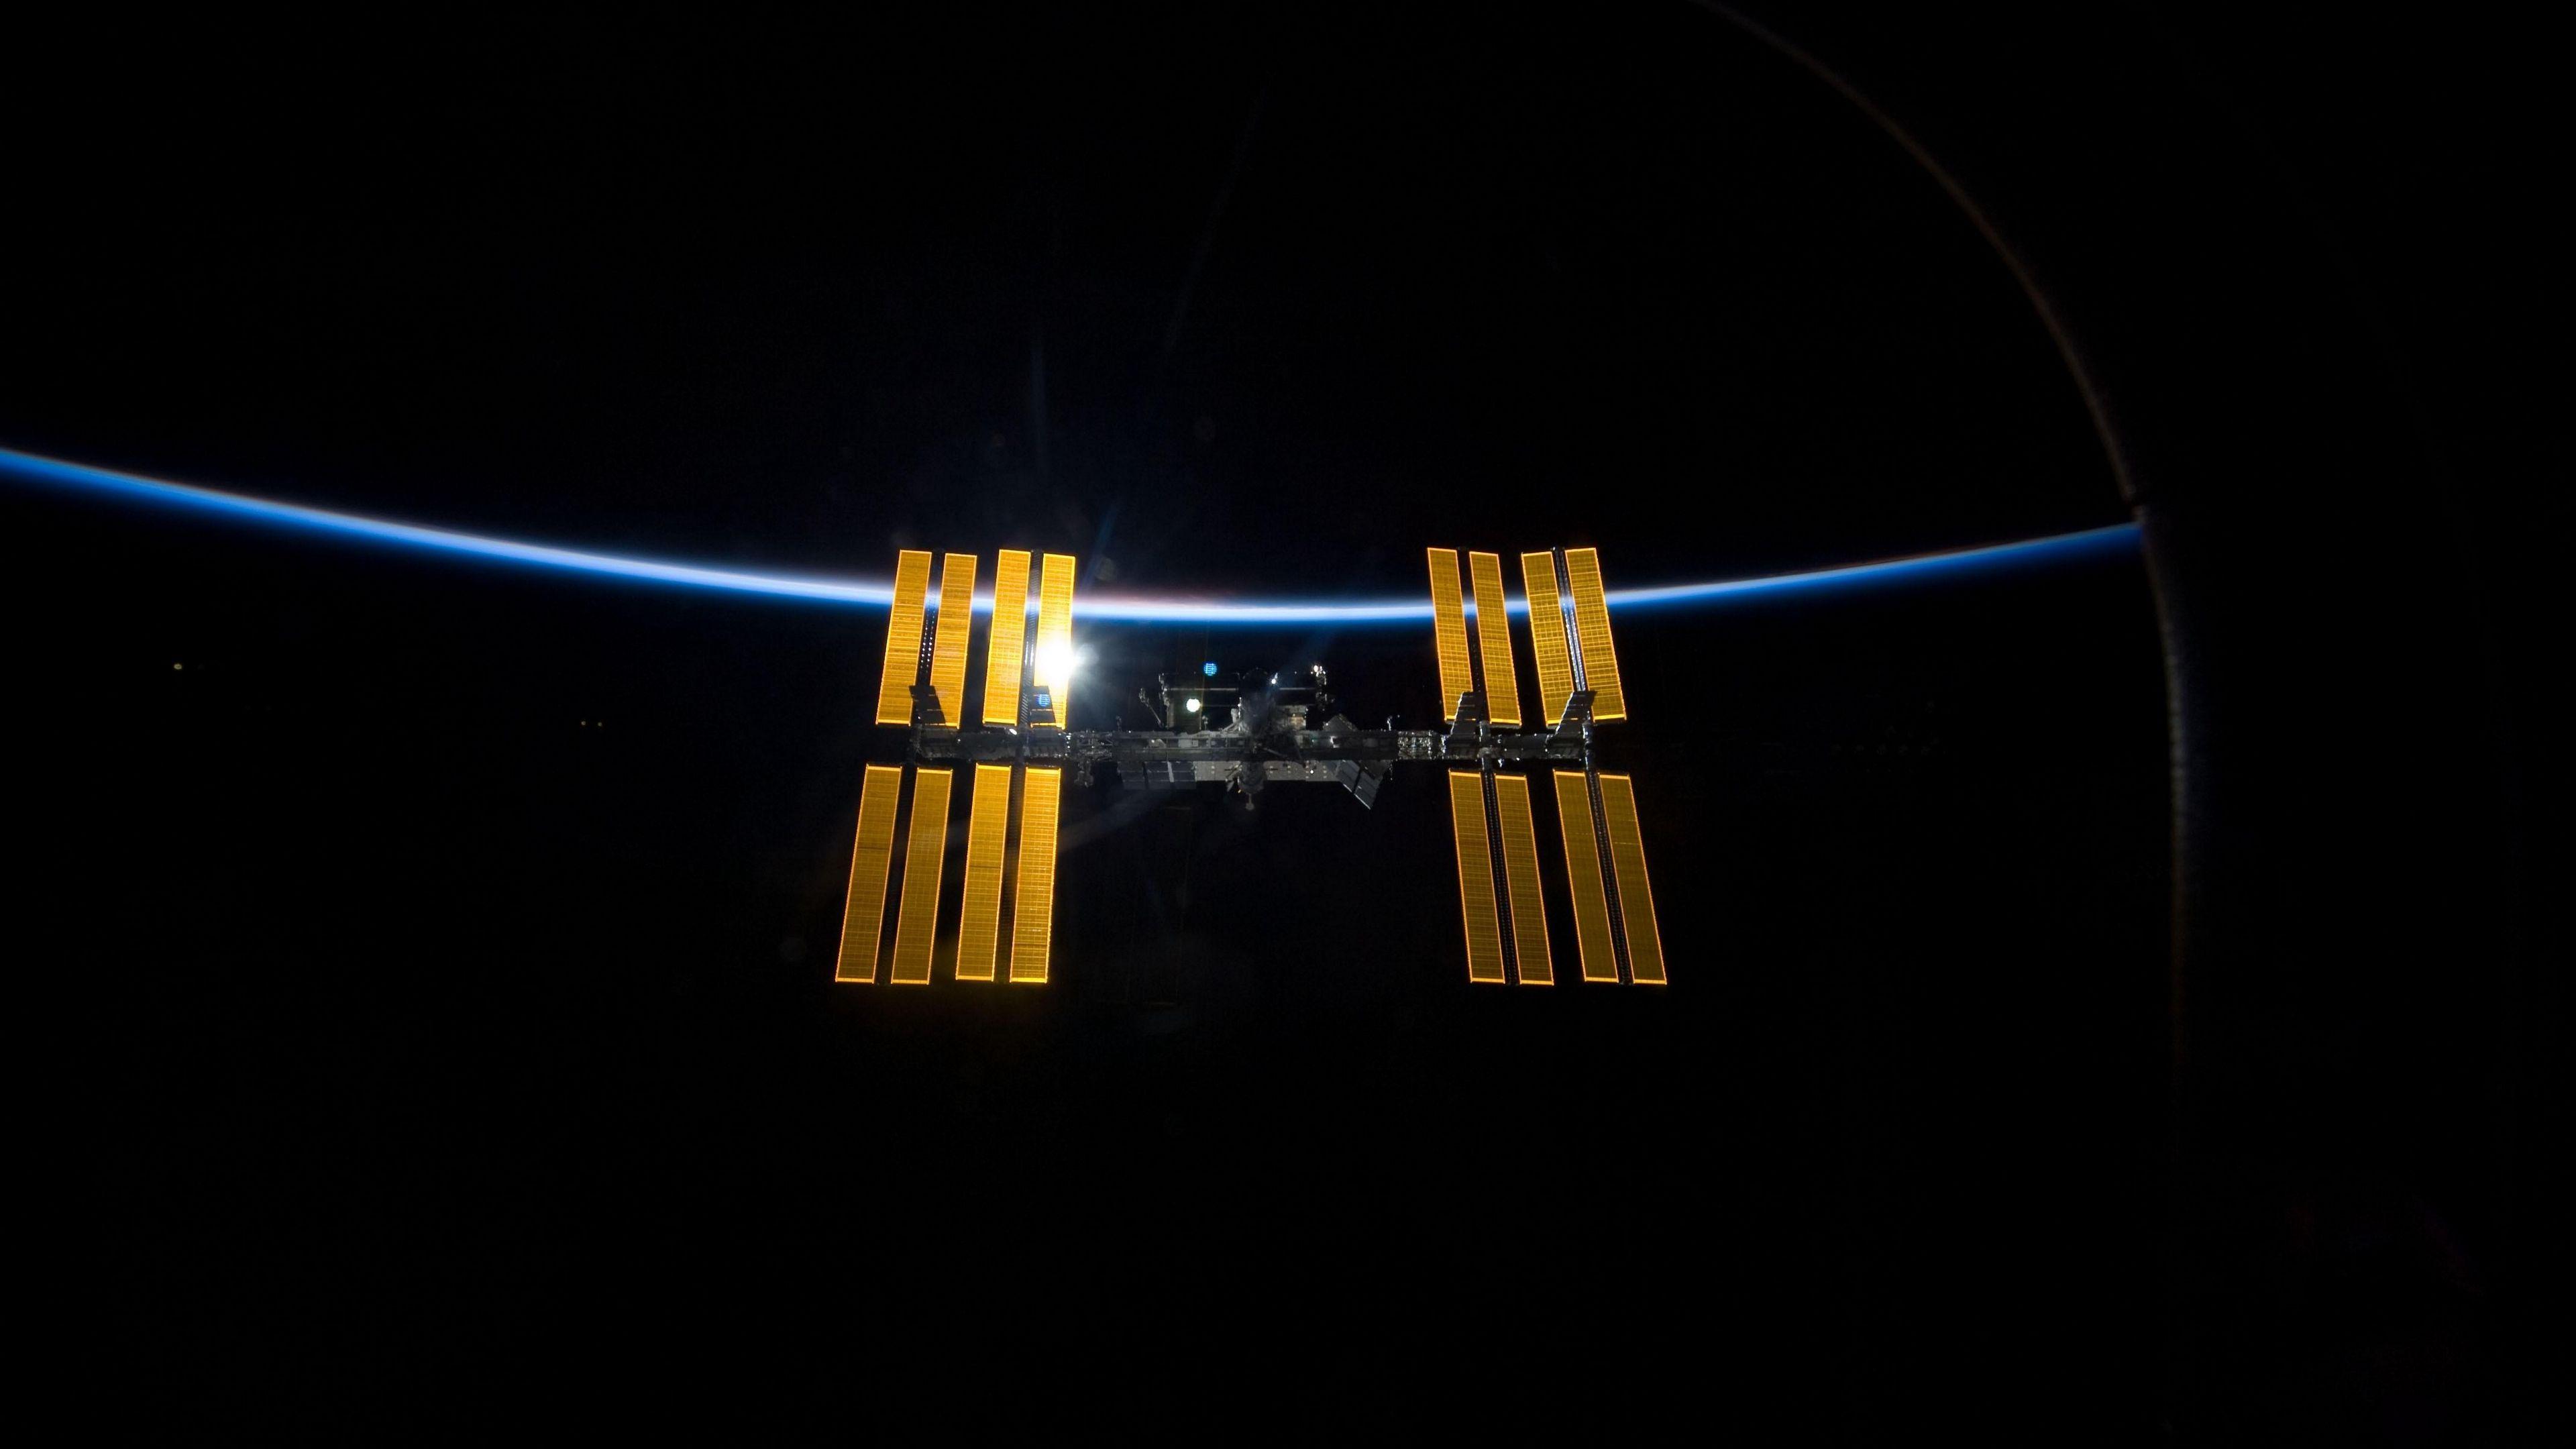 Download wallpaper 3840x2160 space, station iss, world, laboratory, light 4k uhd 16:9 HD background